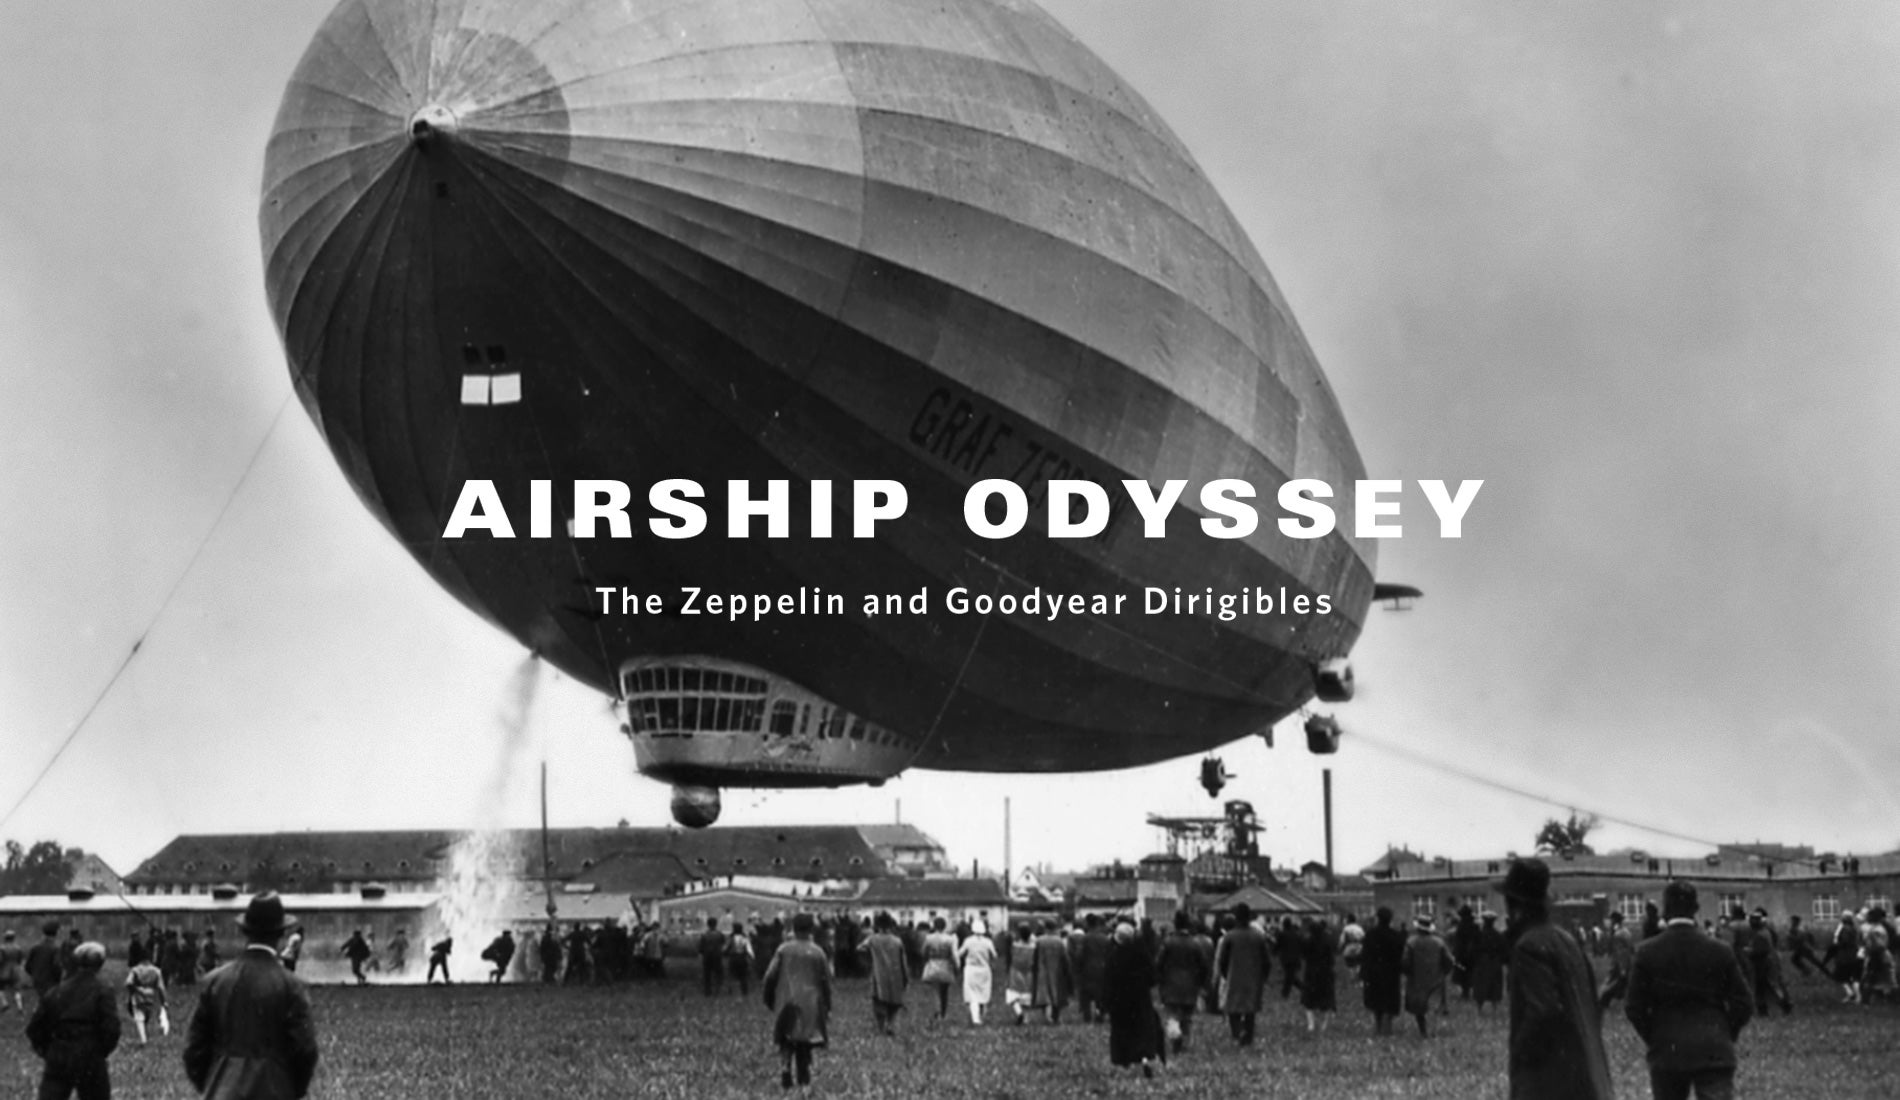 The Zeppelin and Goodyear Dirigibles 